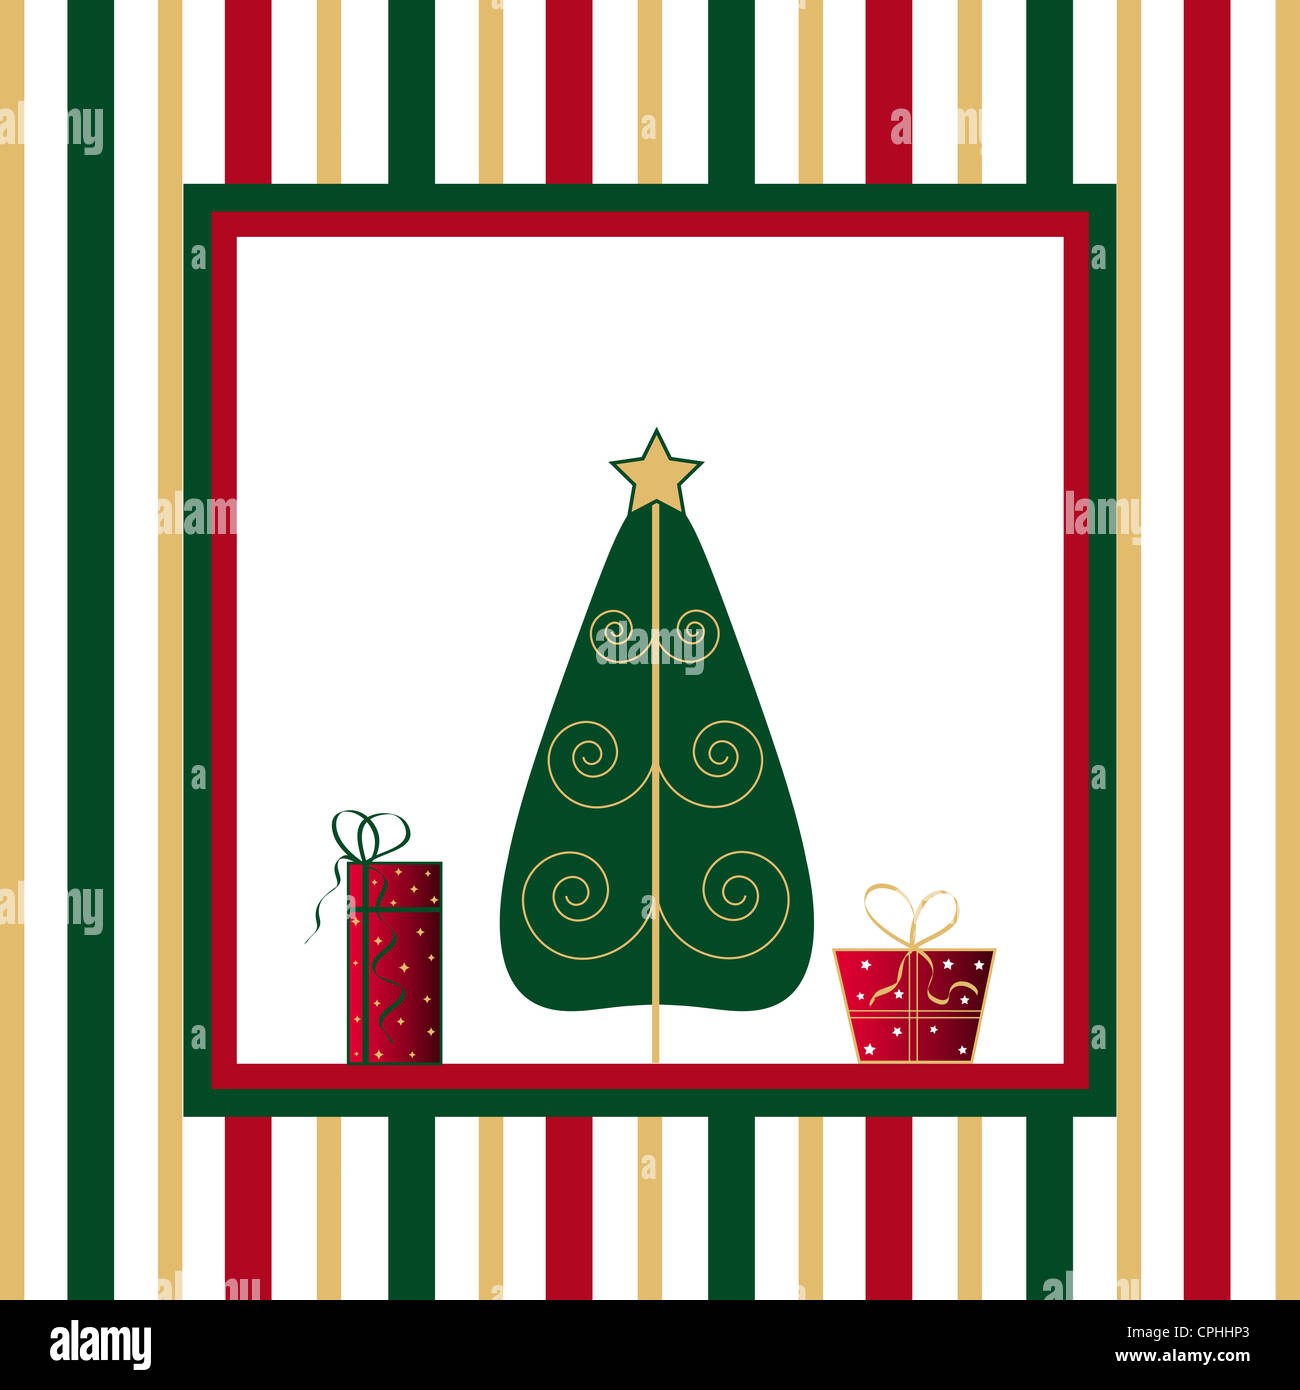 Christmas greeting design in red green and gold Stock Photo